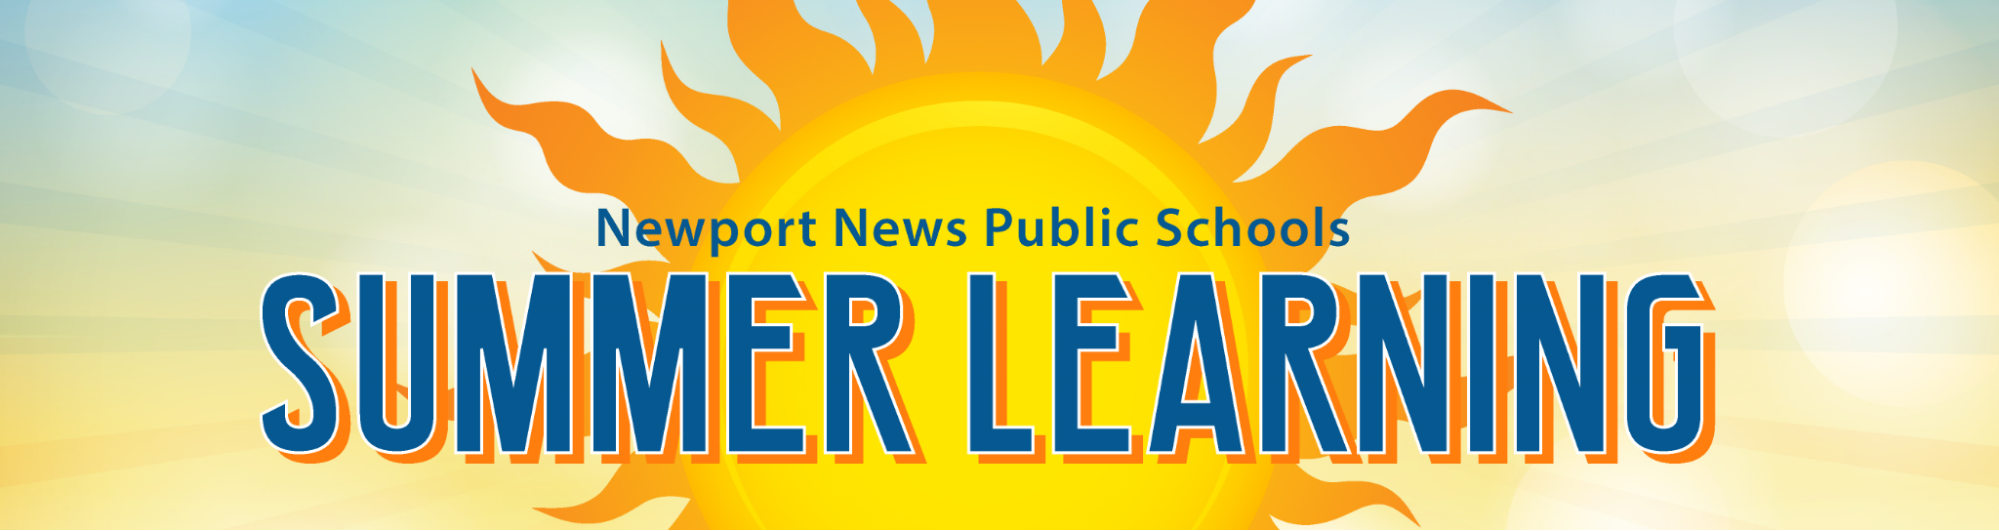 Newport News Public Schools Summer Learning for Secondary Students